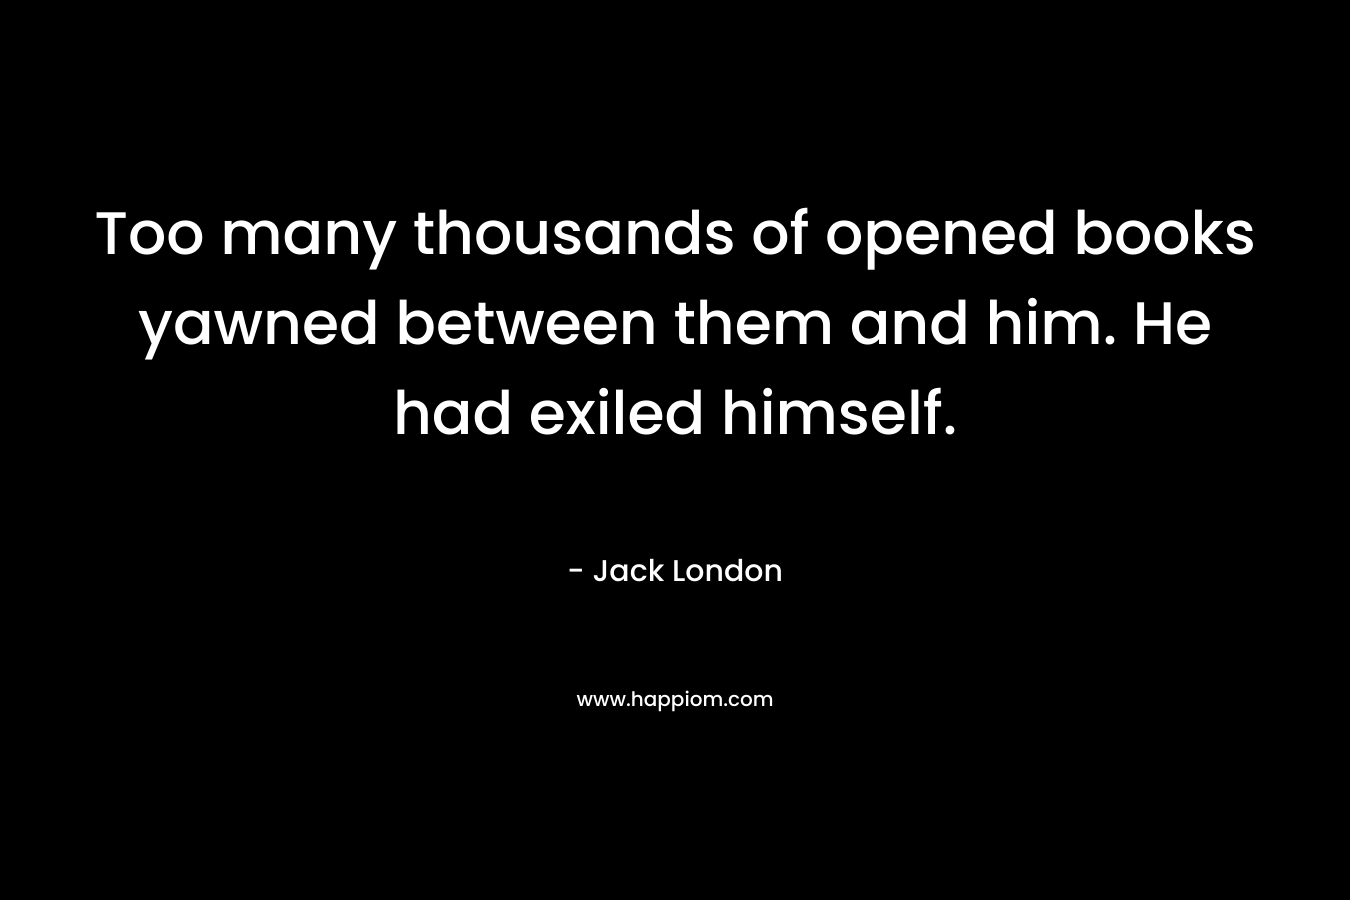 Too many thousands of opened books yawned between them and him. He had exiled himself. – Jack London